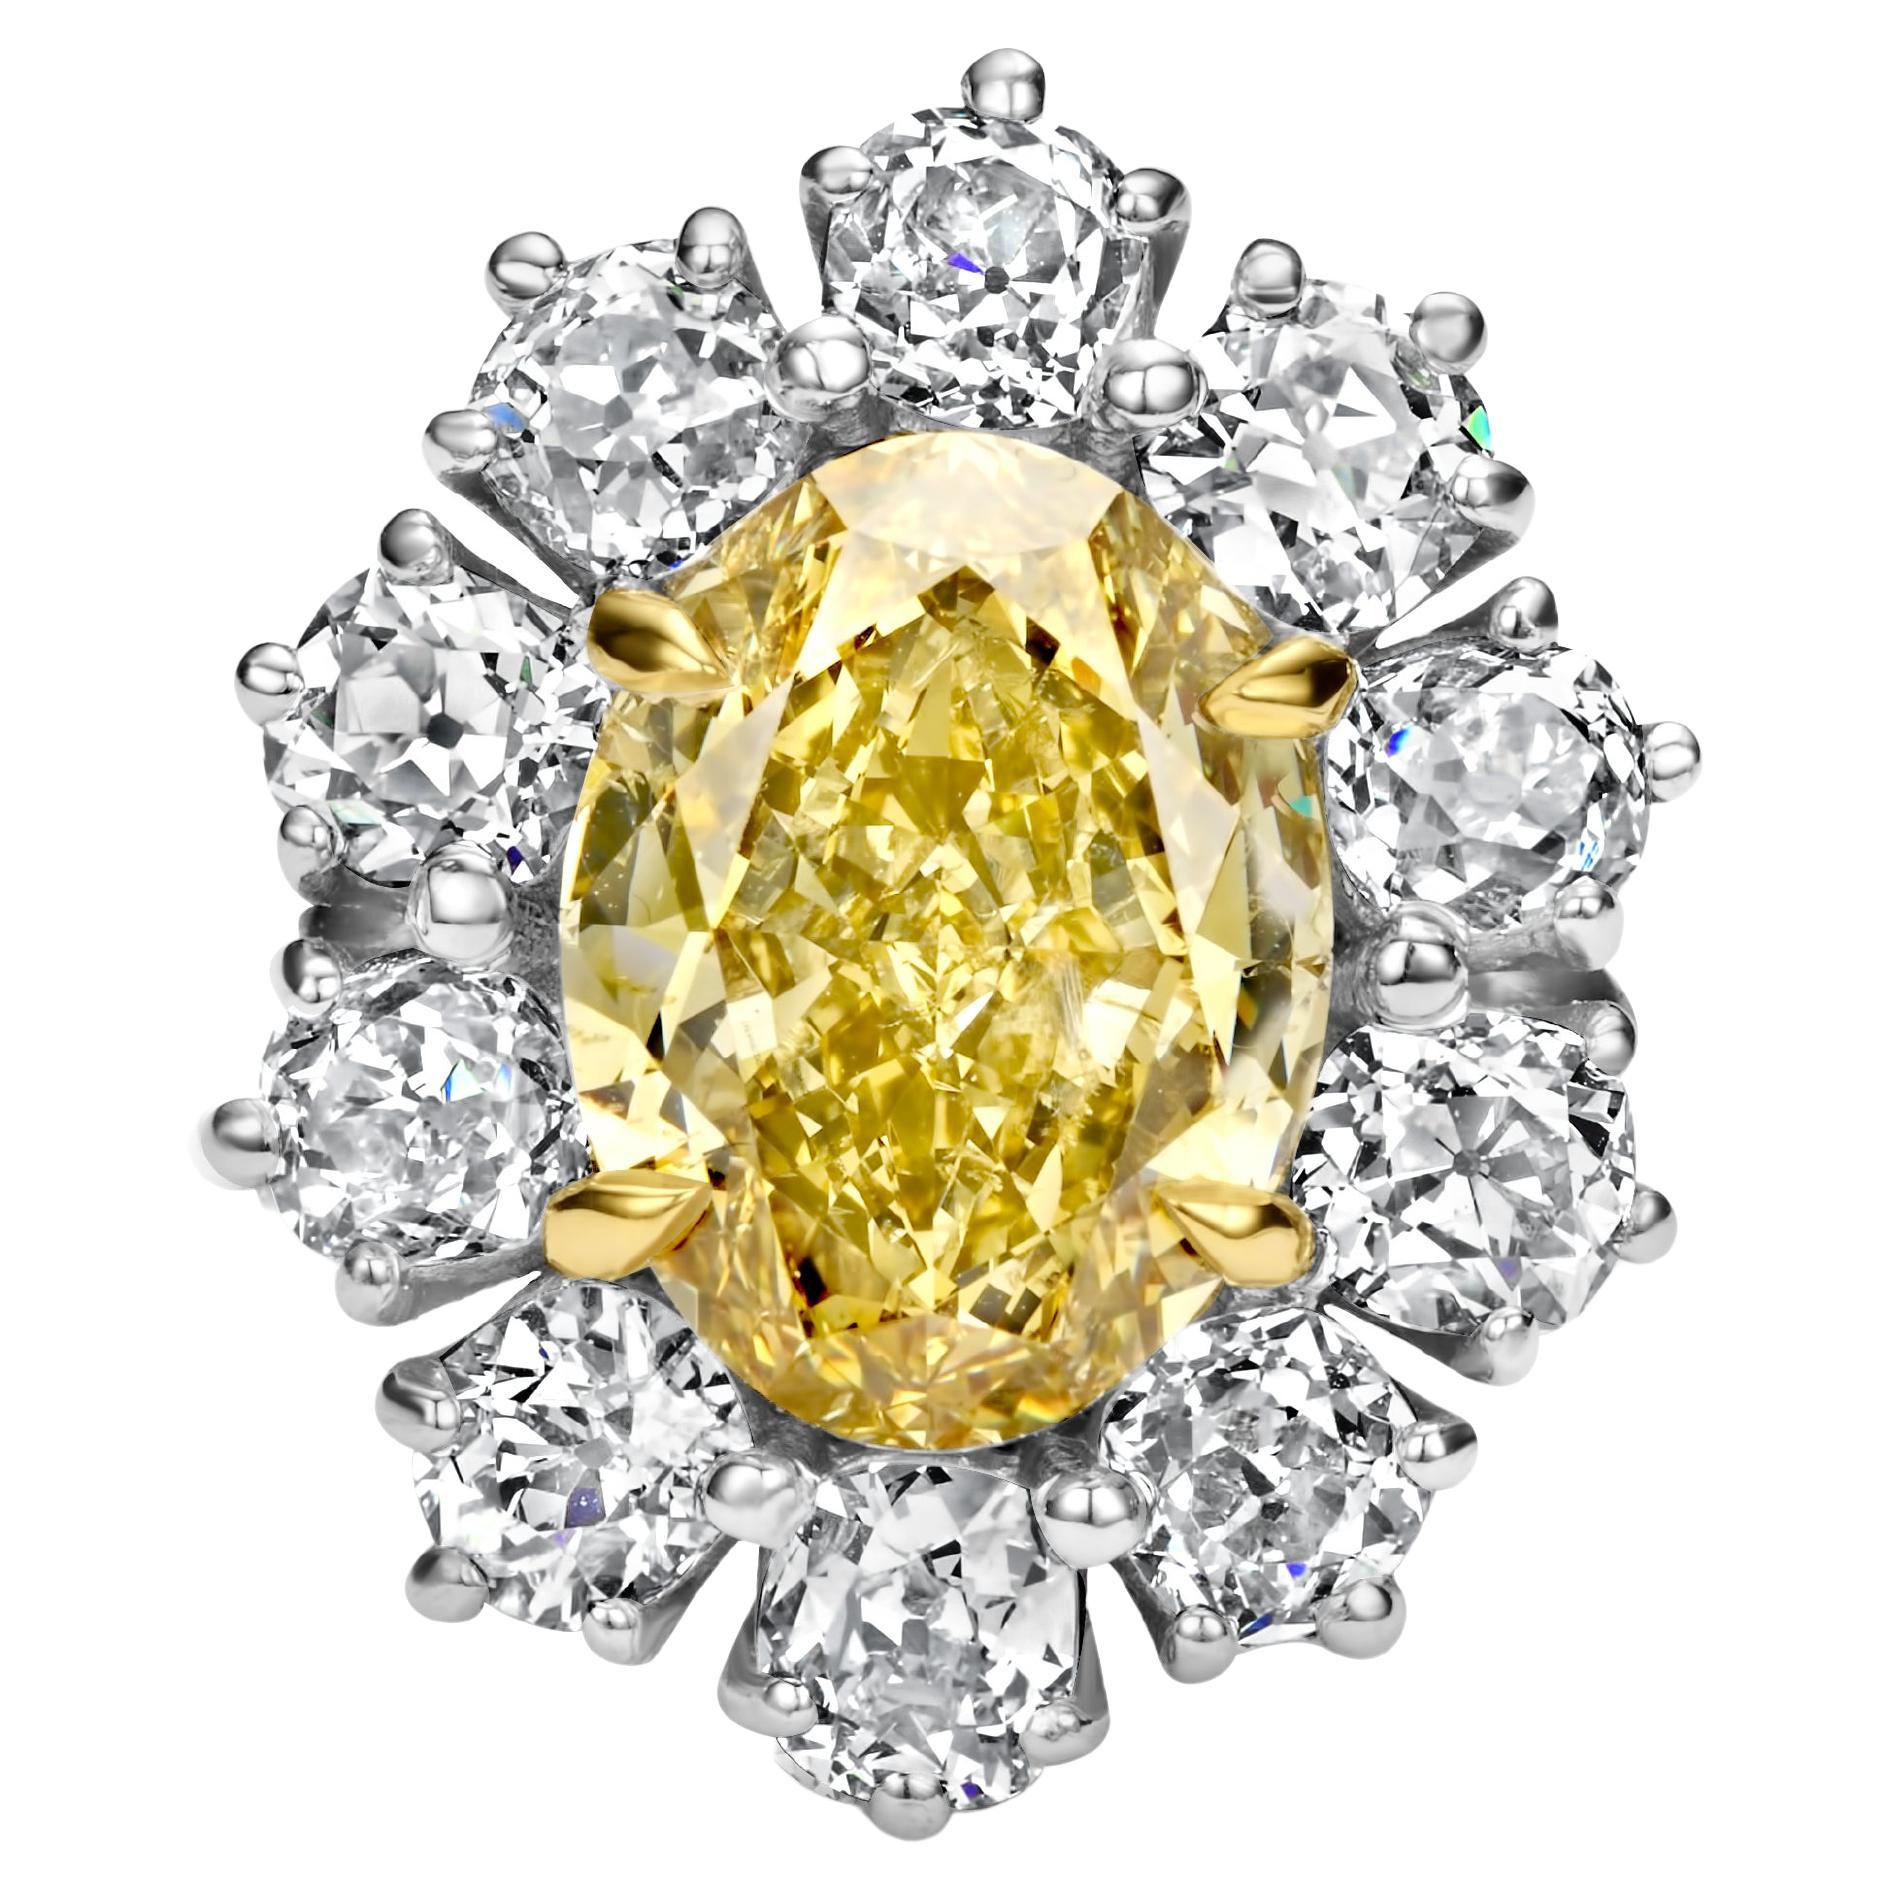 Gorgeous 18kt White Gold Ring With 7.17ct. Natural Fancy Yellow Diamond and 4.9ct White Diamonds

Yellow diamond: Oval modified brilliant, Natural Fancy deep brownish Yellow diamond, 7.17 ct. Comes with GIA Certificate 5202894197 

Diamonds: Old